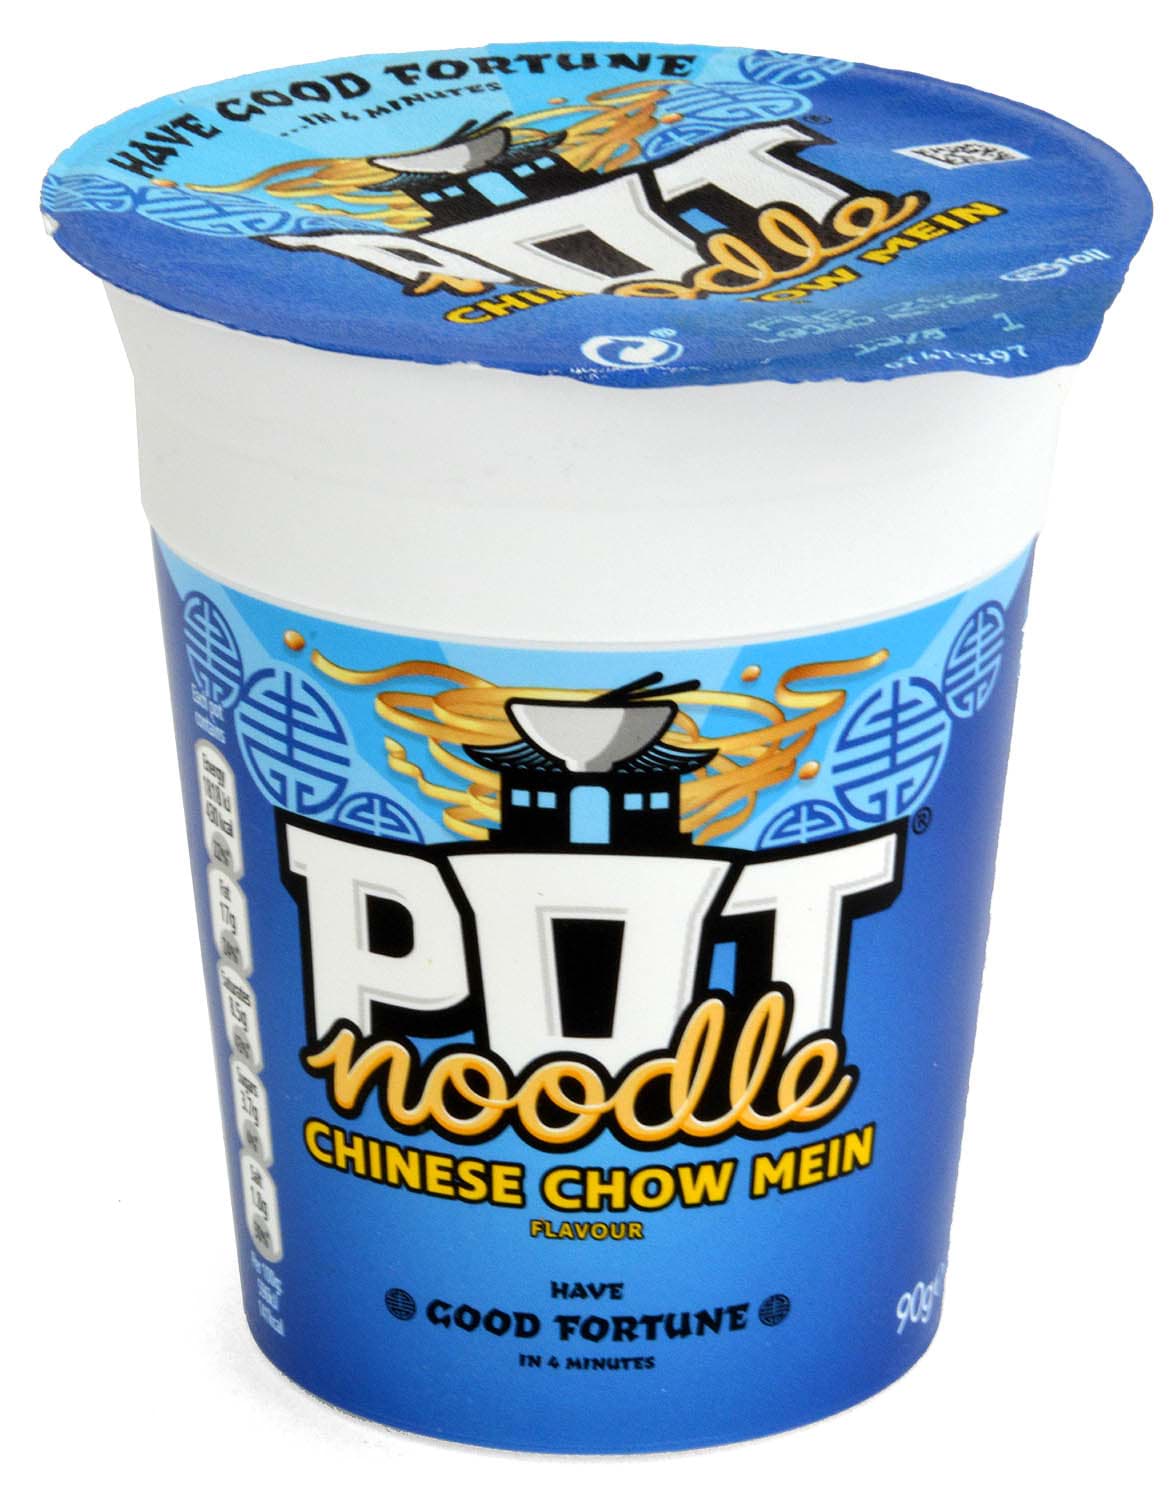 Picture of Pot Noodle Chinese Chow Mein